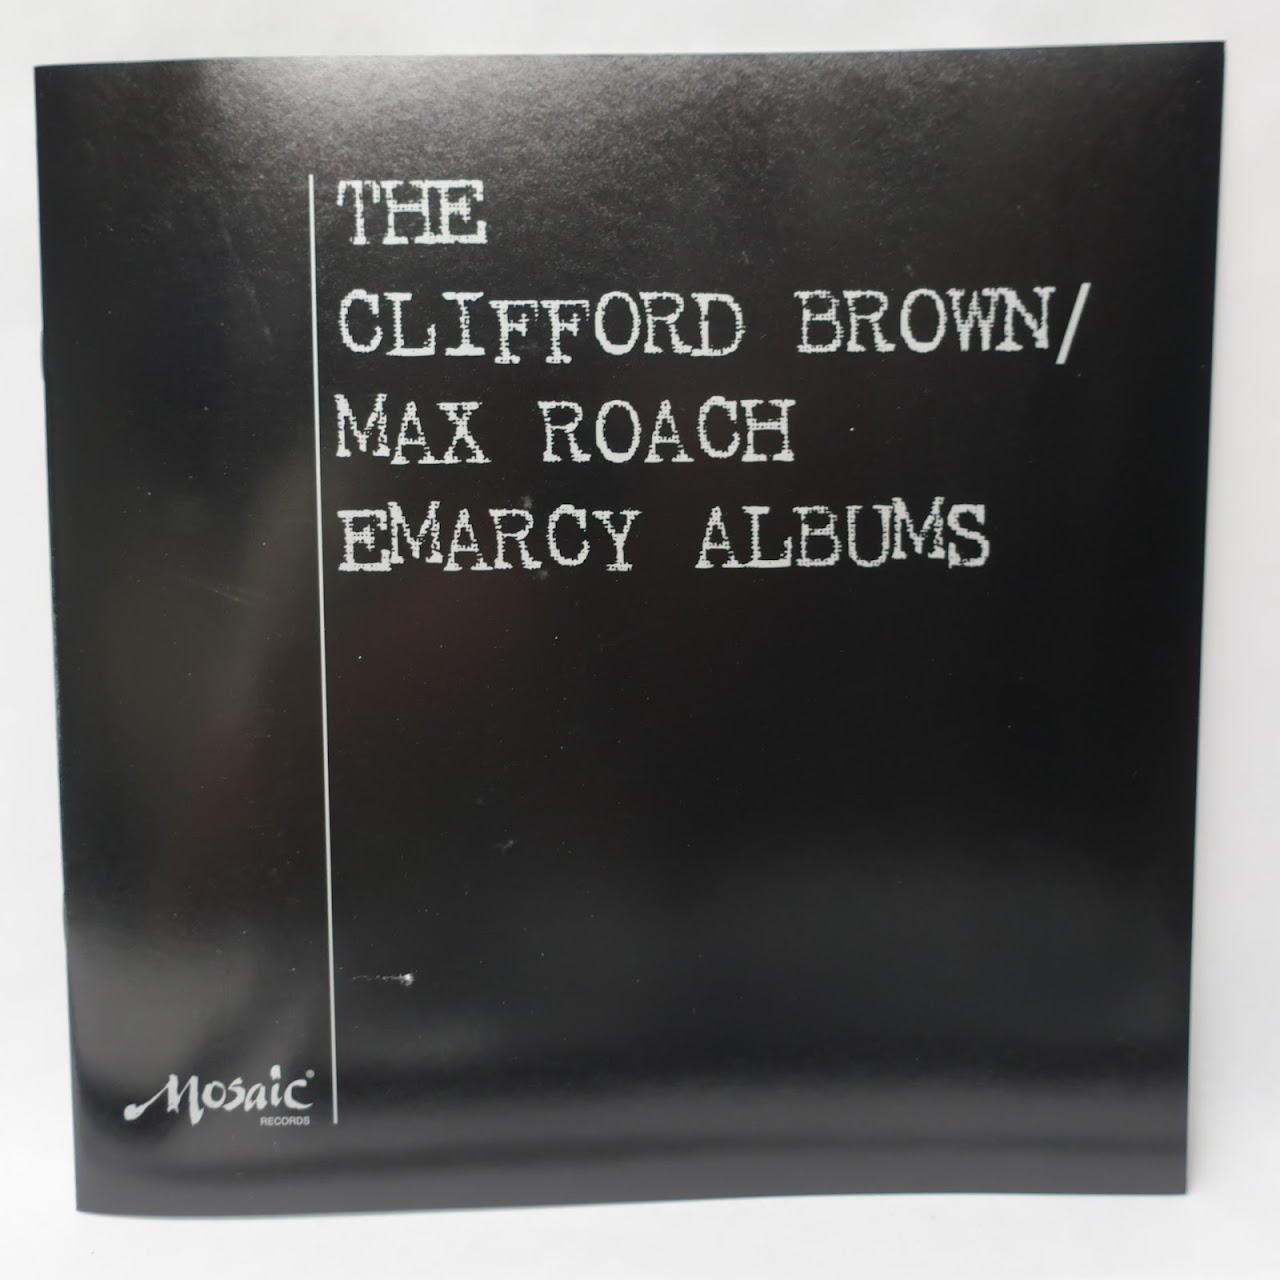 The Clifford Brown/Max Roach Emarcy Albums Limited LP Set